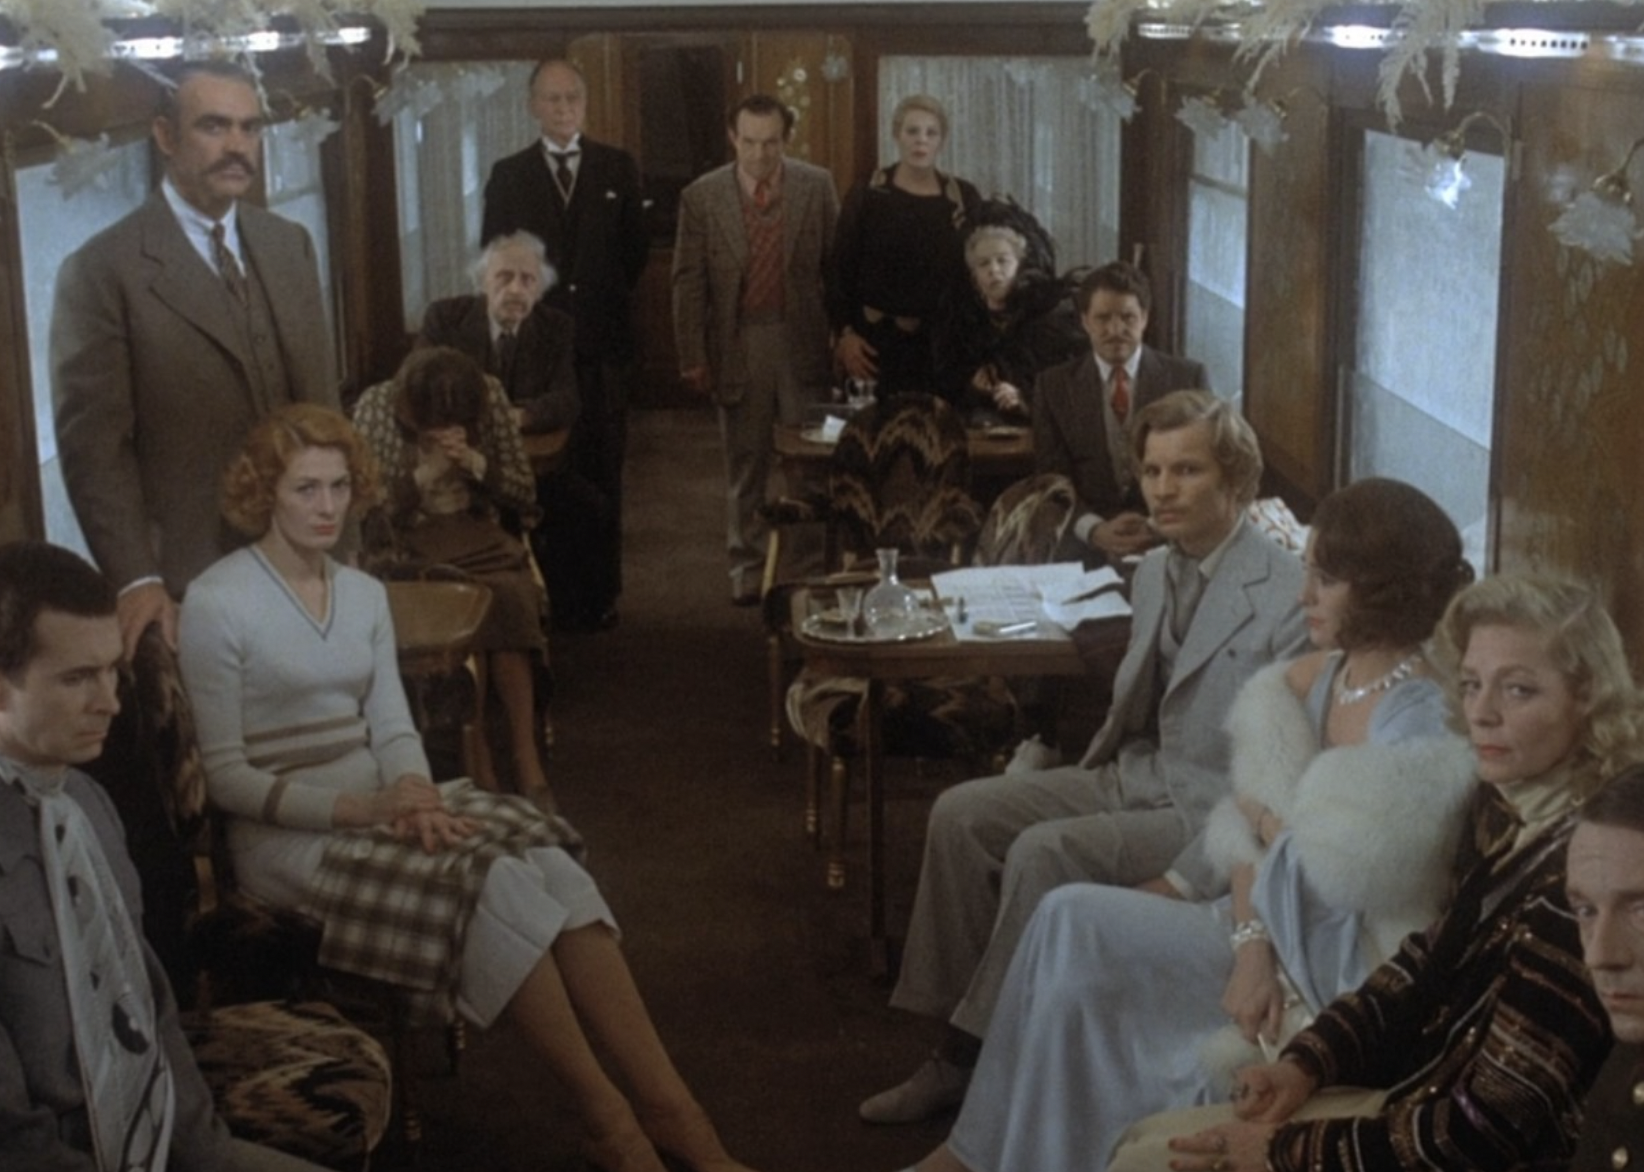 The cast of "Murder on the Orient Express" in a scene on a train